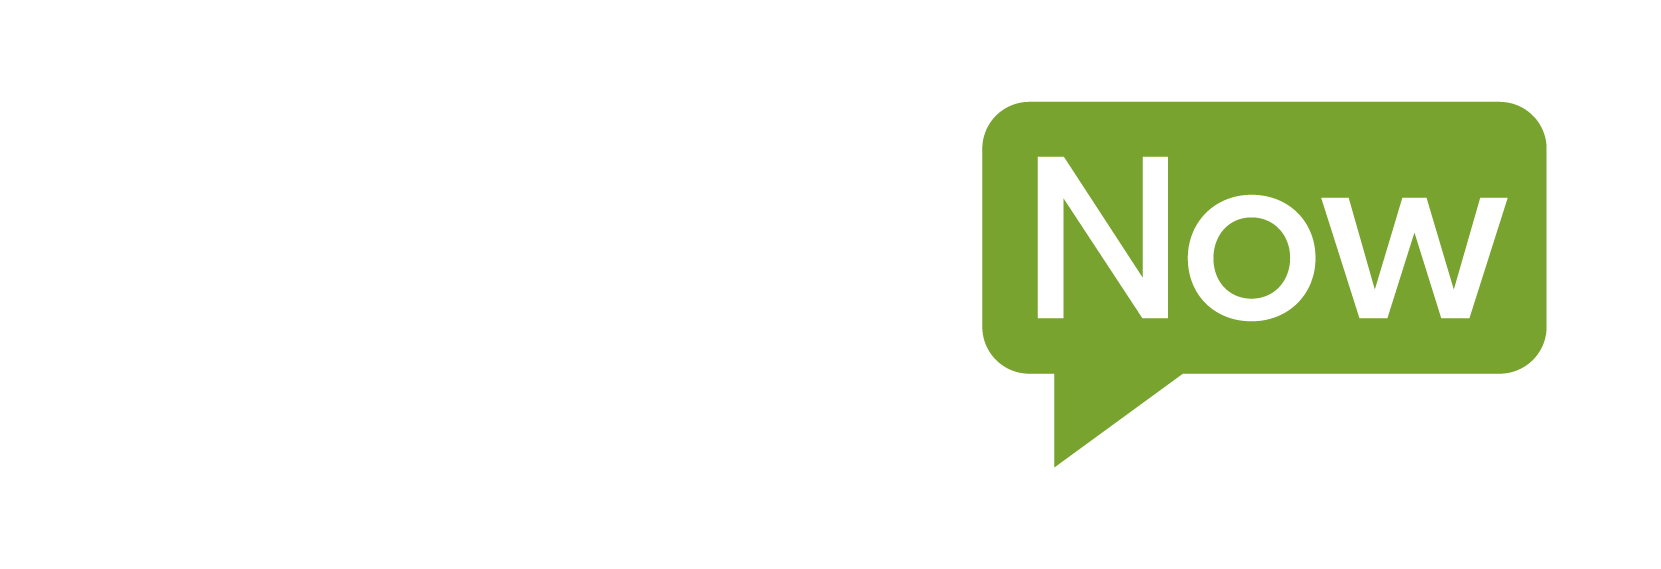 One Call Now Self Update Portal